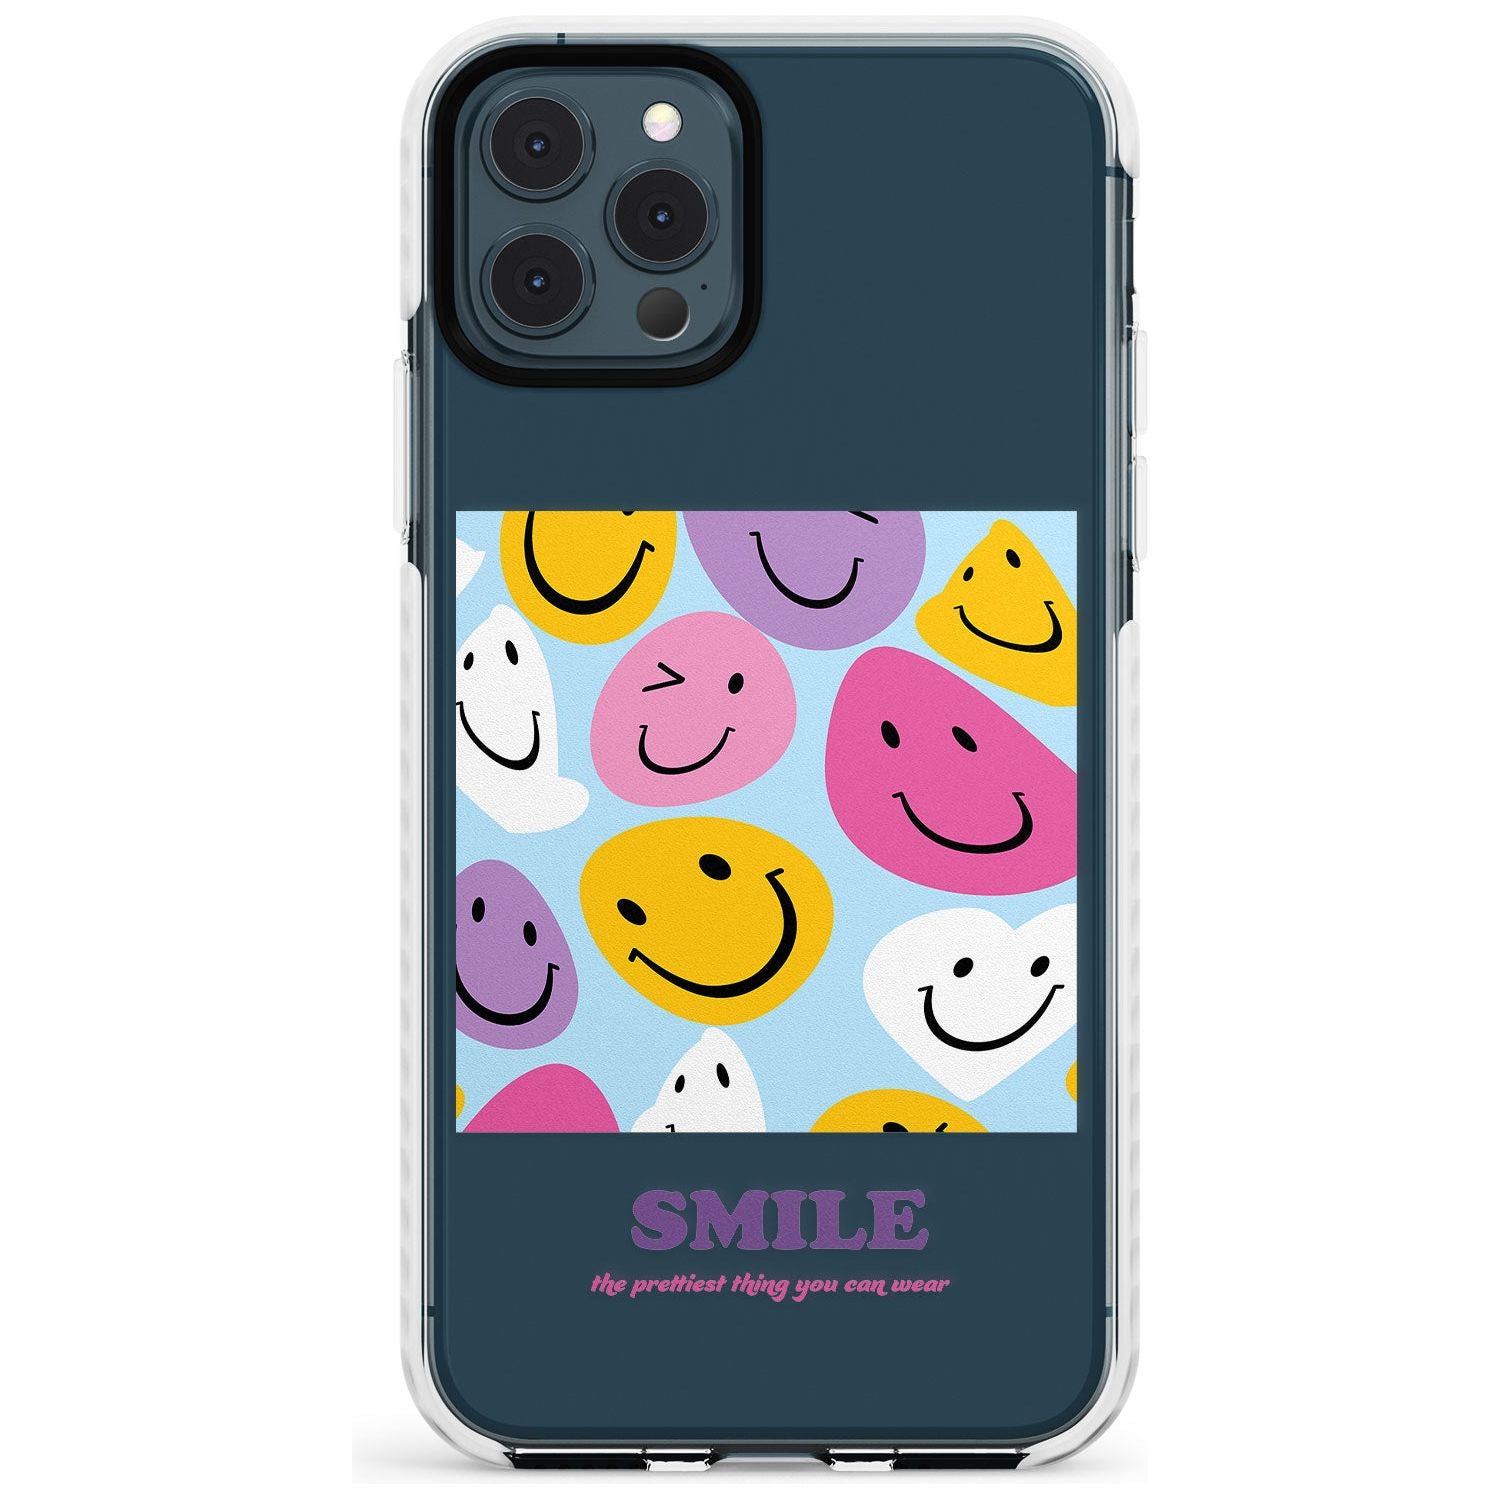 A Smile Impact Phone Case for iPhone 11 Pro Max